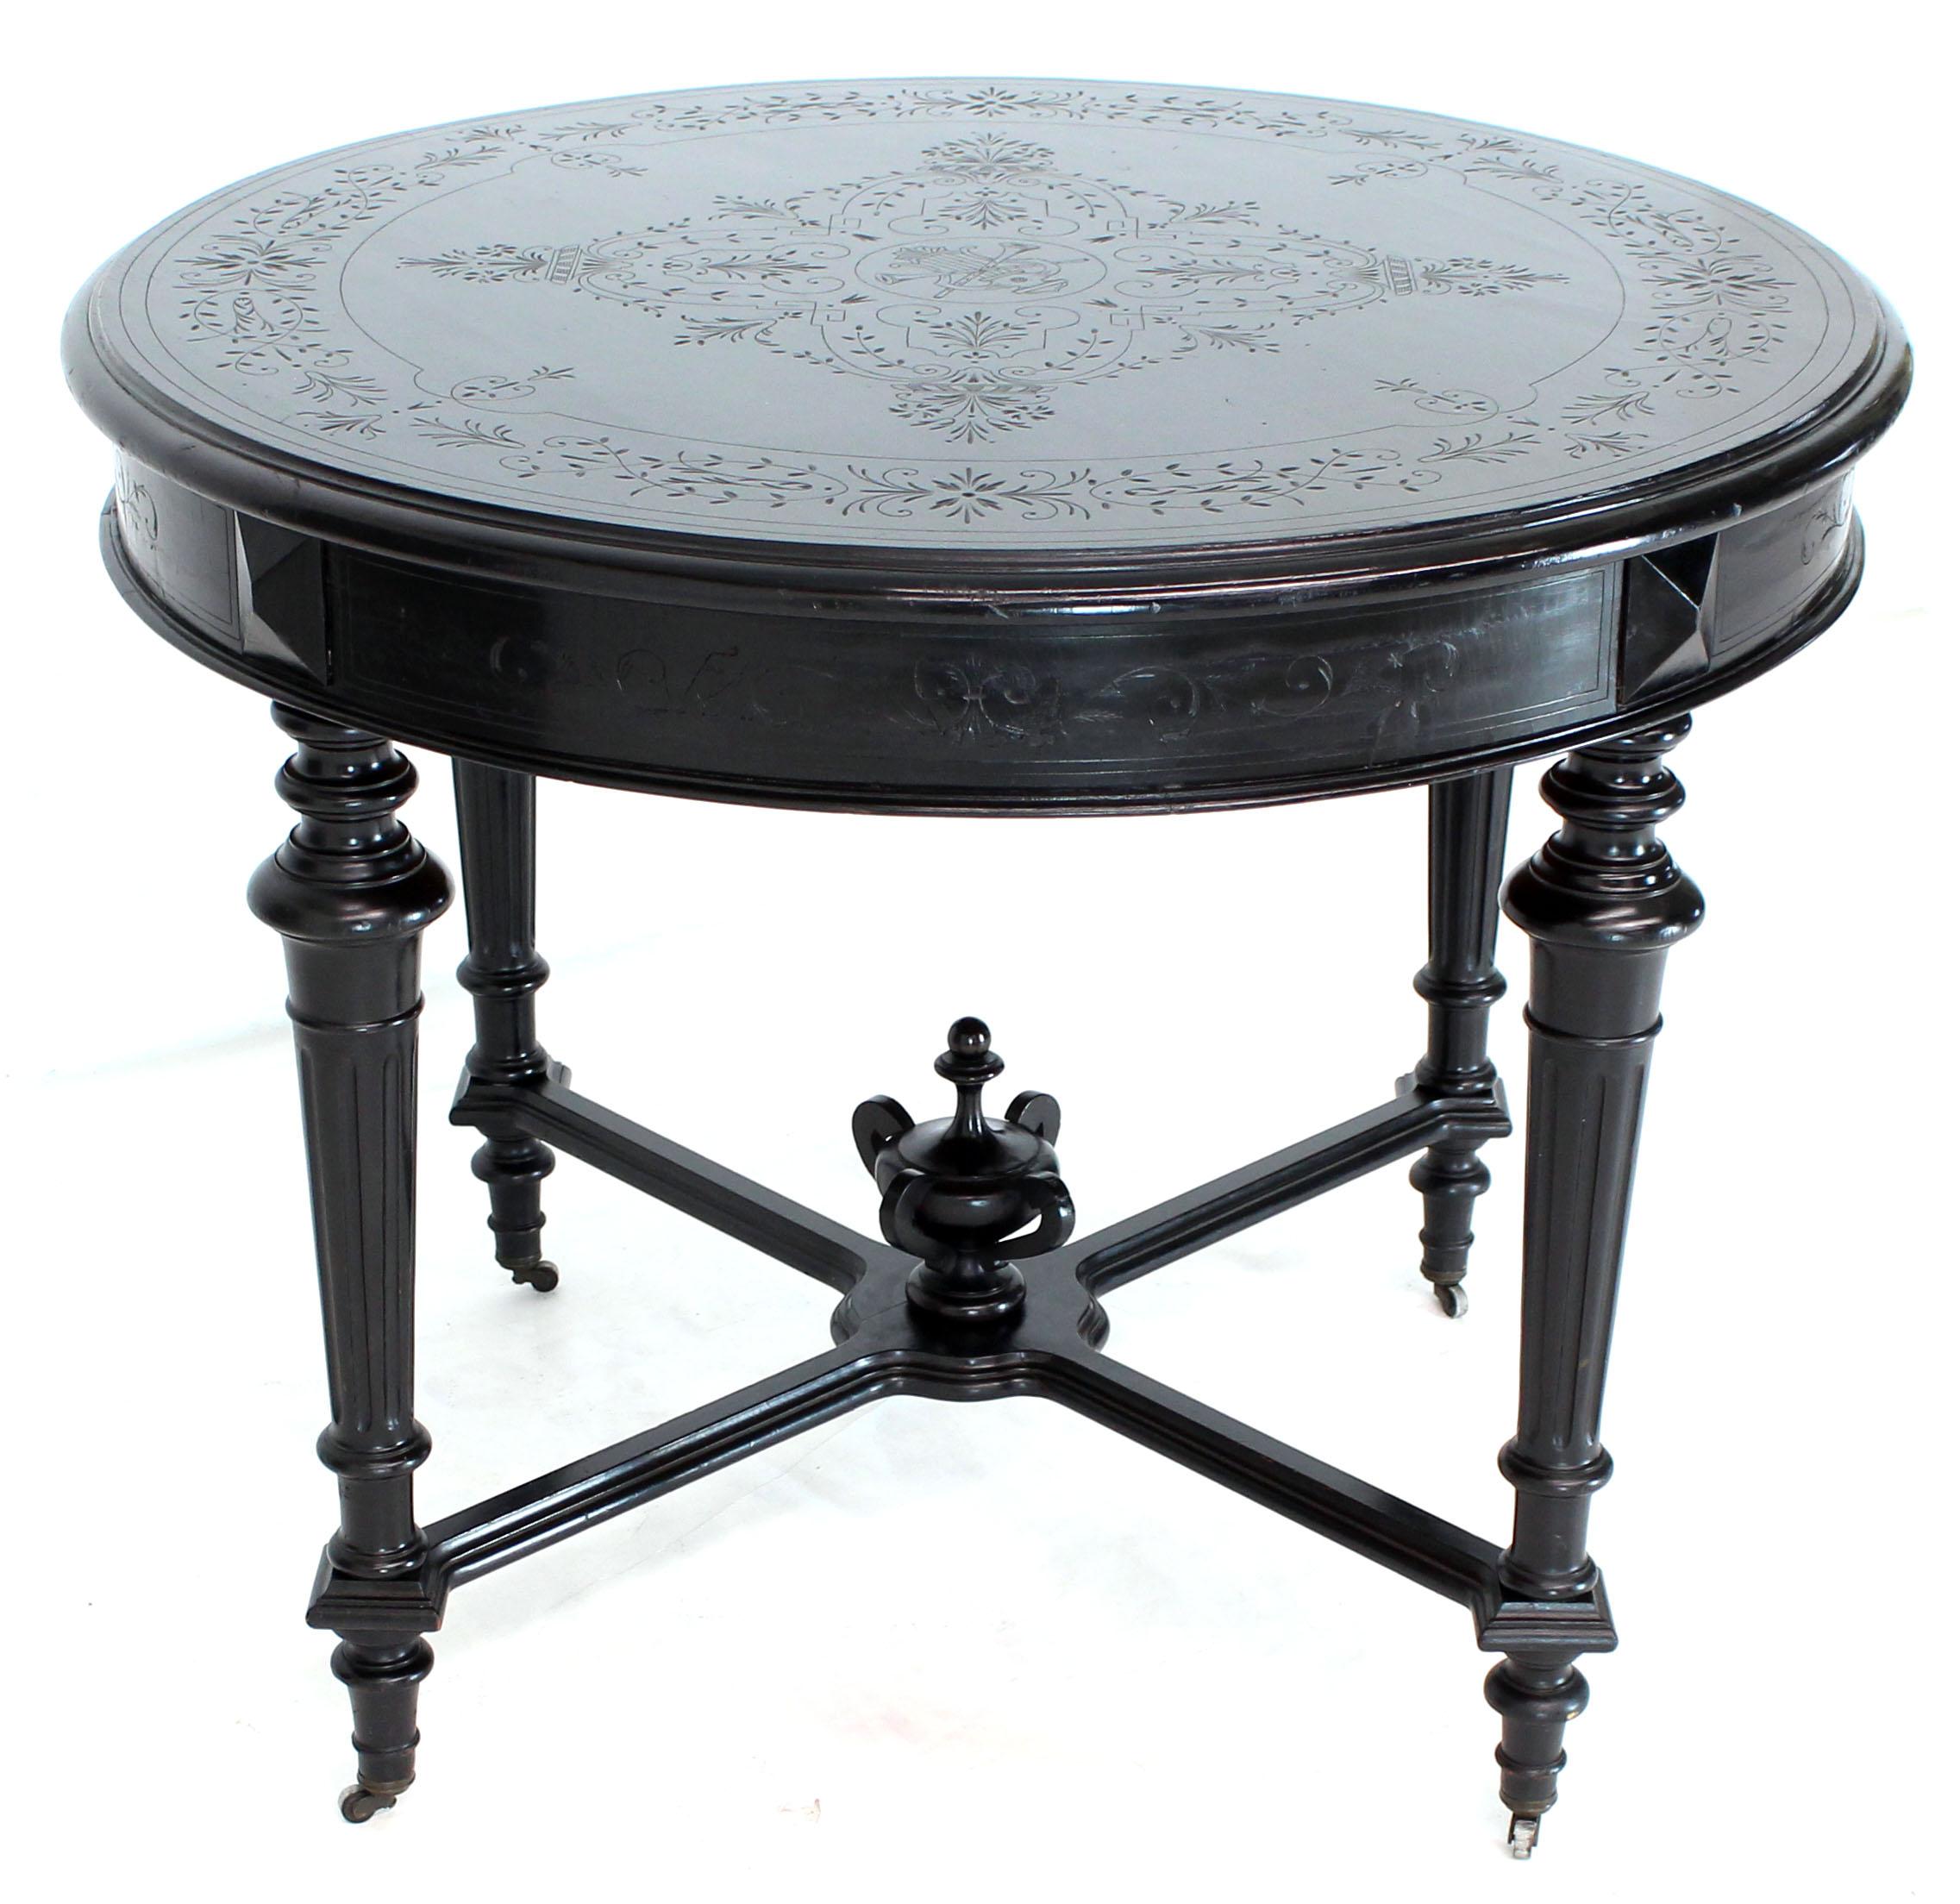 Antique Ebonised Round Centre Game Card Table Victorian East Lake 1880s